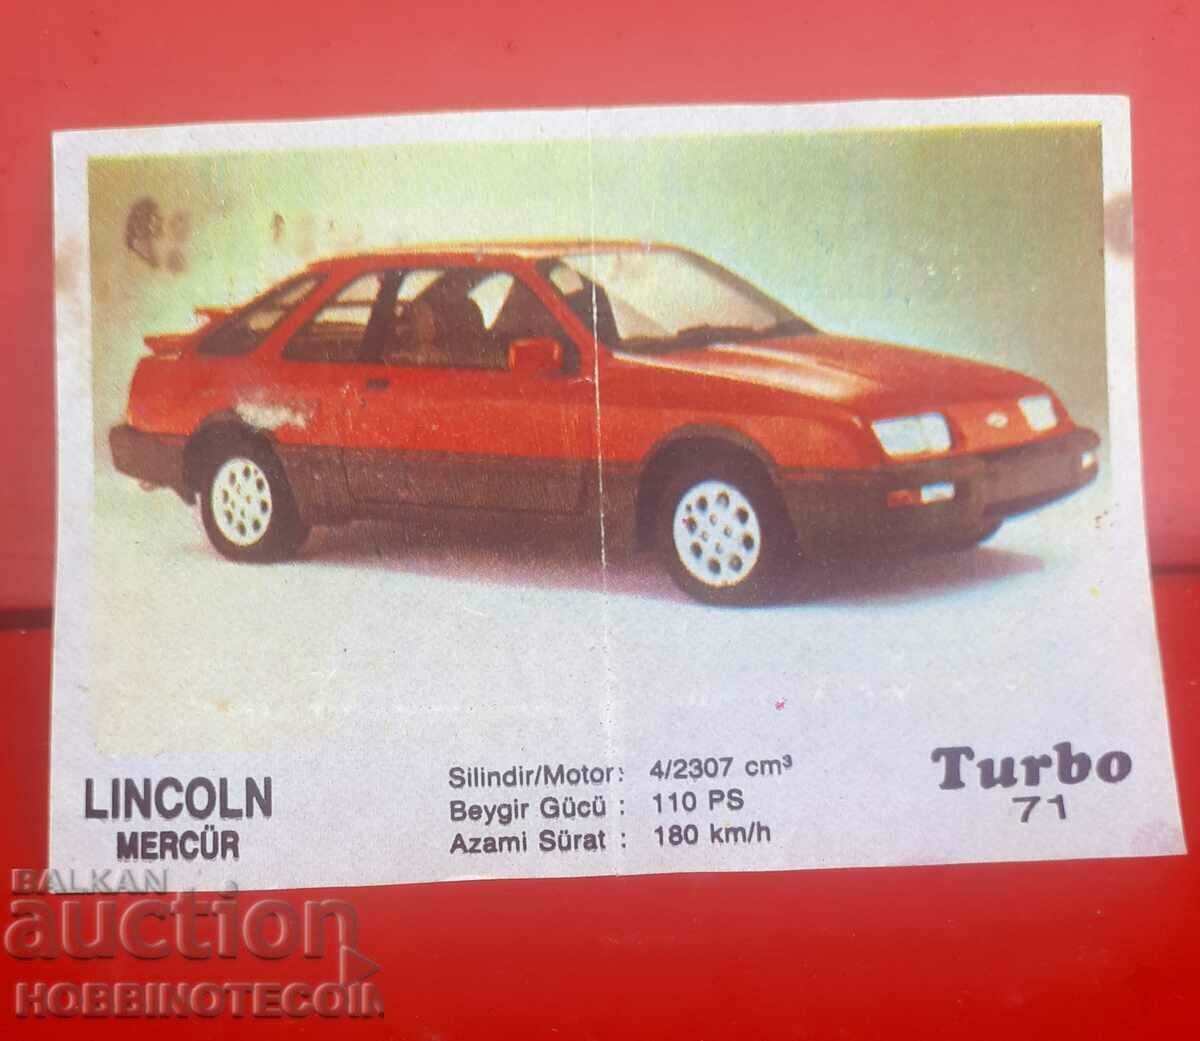 PICTURE TURBO TURBO N 71 LINCOLN MERCUR